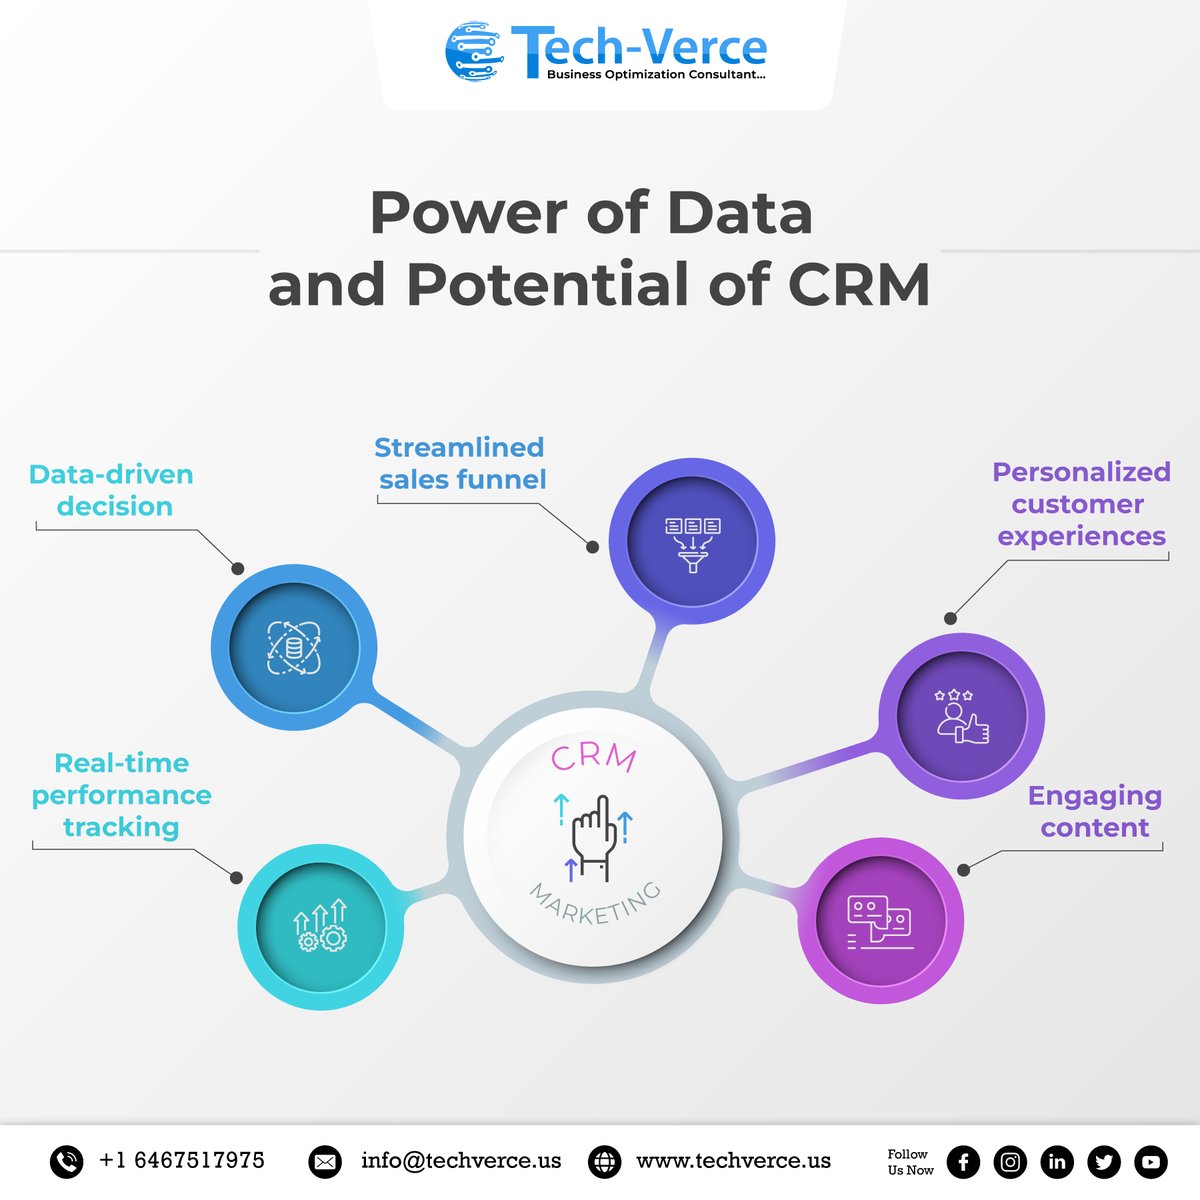 Improve customer experience, streamline sales, and improve decision-making with our data-backed CRM and marketing expertise.  

URL: techverce.us/crm-software-c…

#crm #CustomerRelationshipManagement #crmsuccess #crmmarketing #crmconsulting #crmplatform